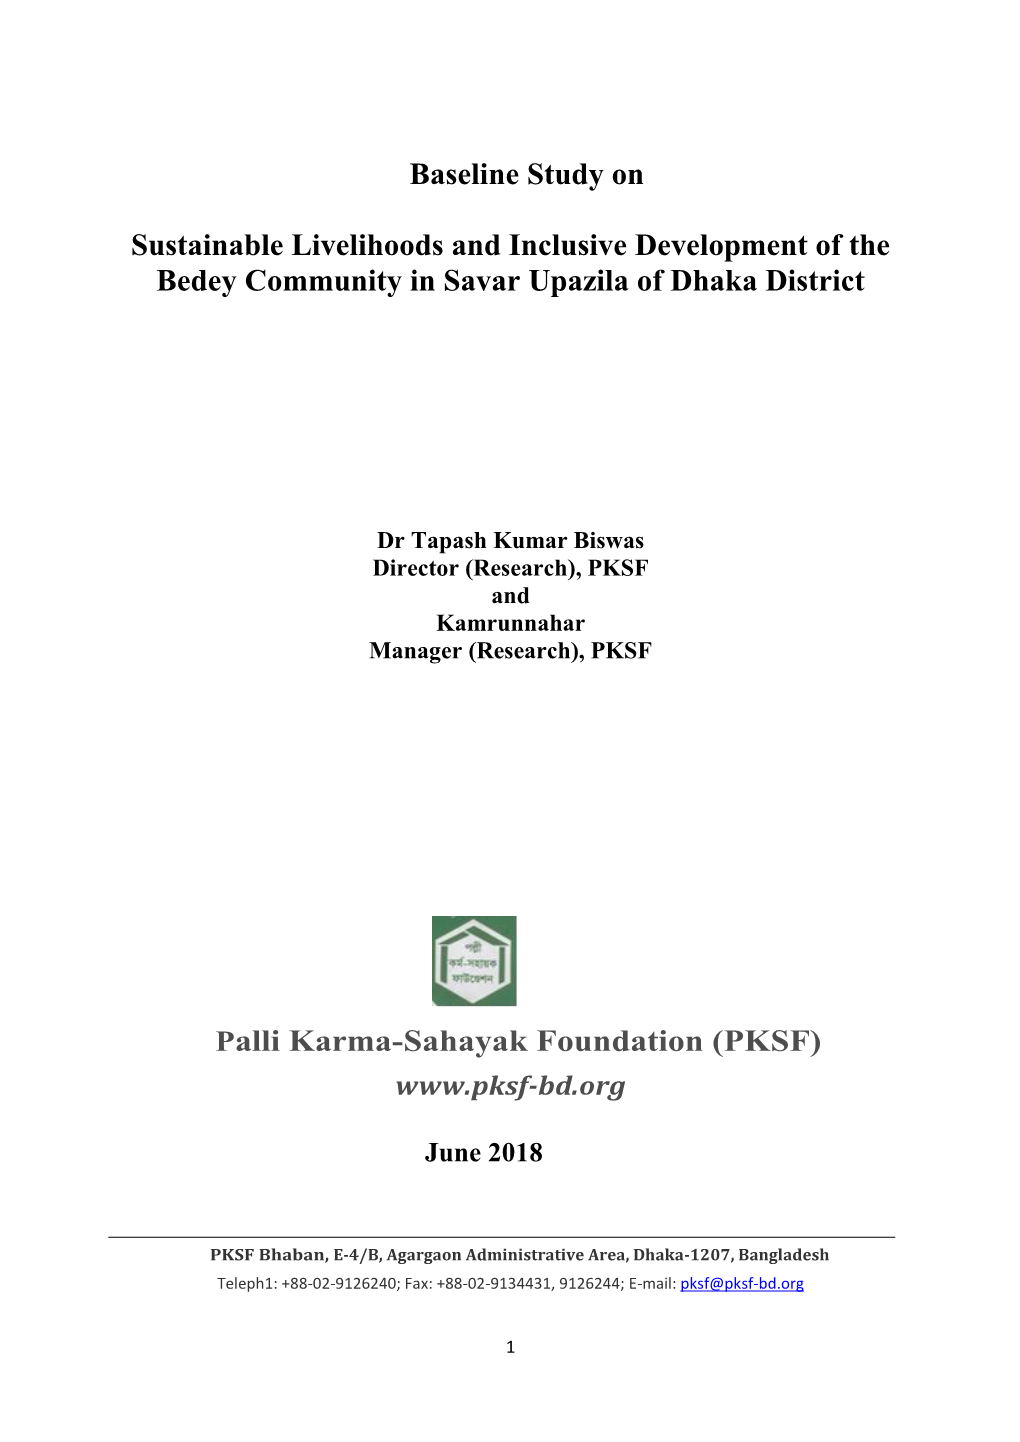 Baseline Study on Sustainable Livelihoods and Inclusive Development of the Bedey Community in Savar Upazila of Dhaka District Pa